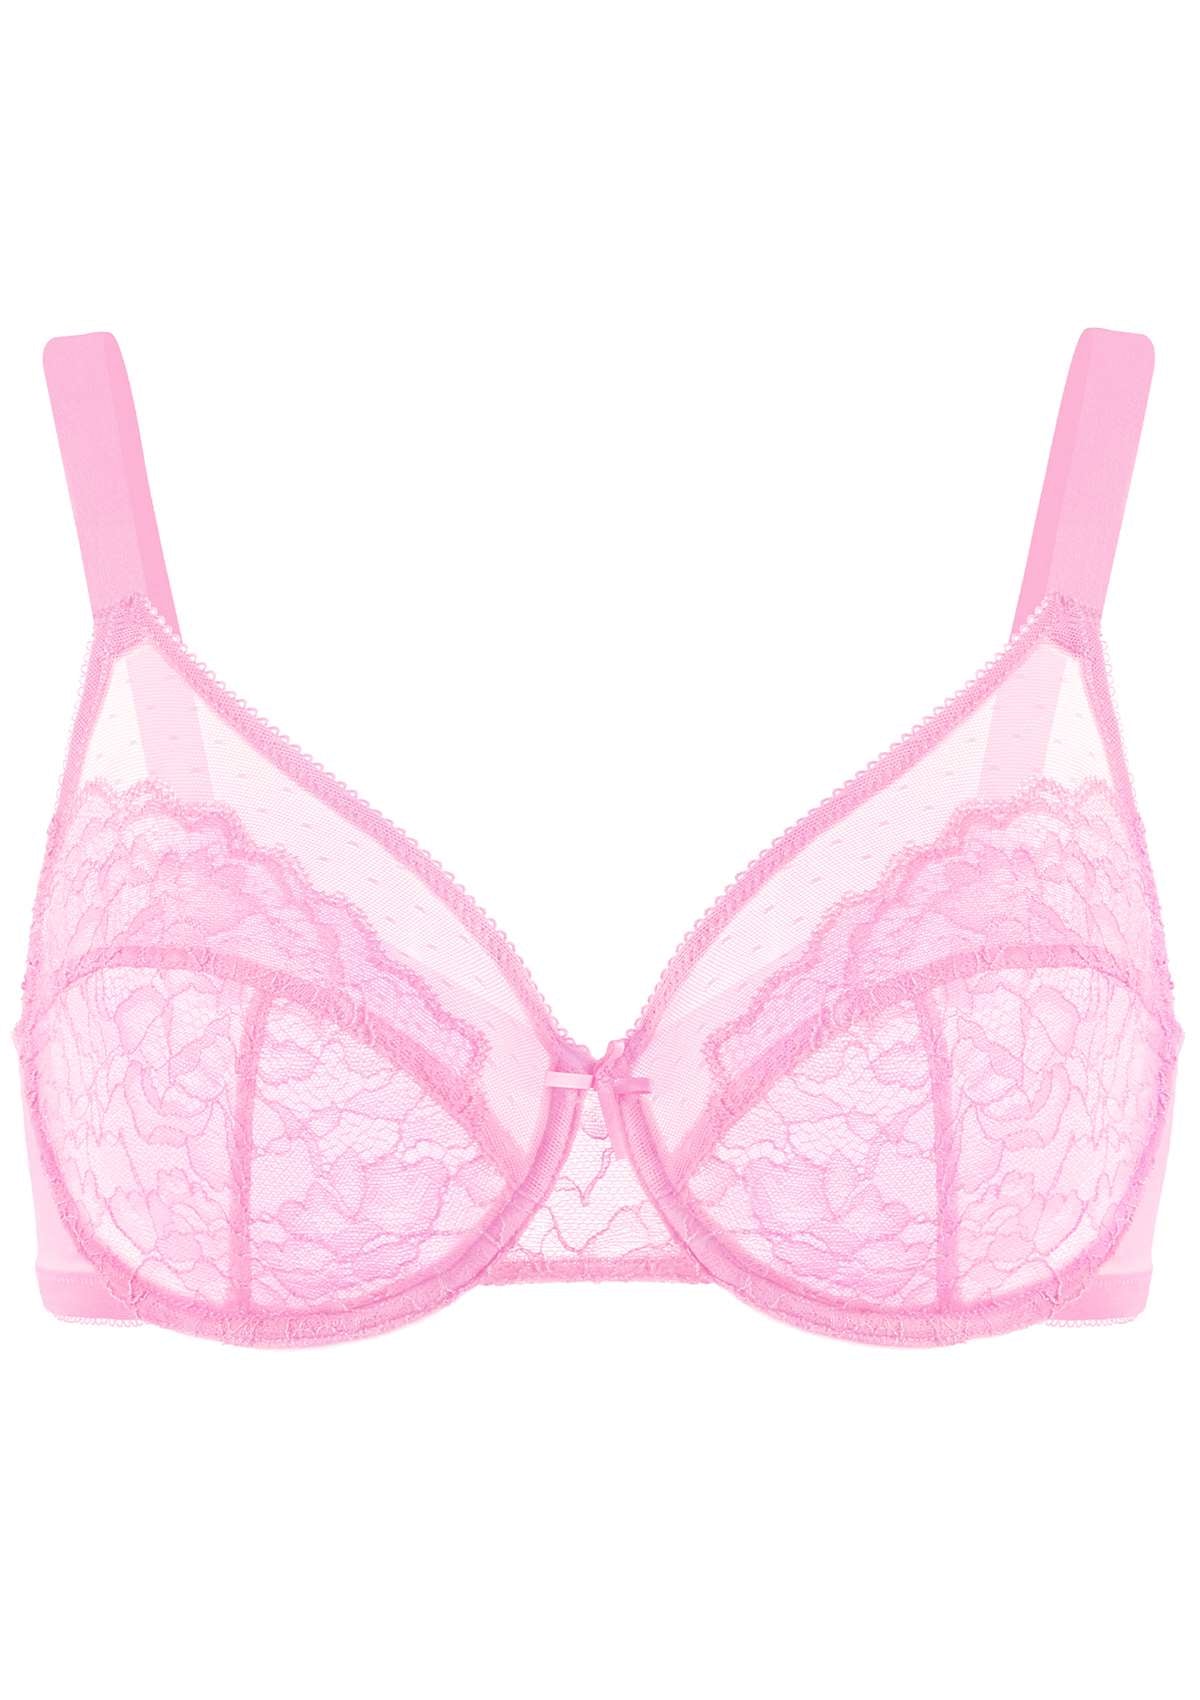 HSIA Enchante Lacy Bra: Comfy Sheer Lace Bra With Lift - Pink / 36 / H